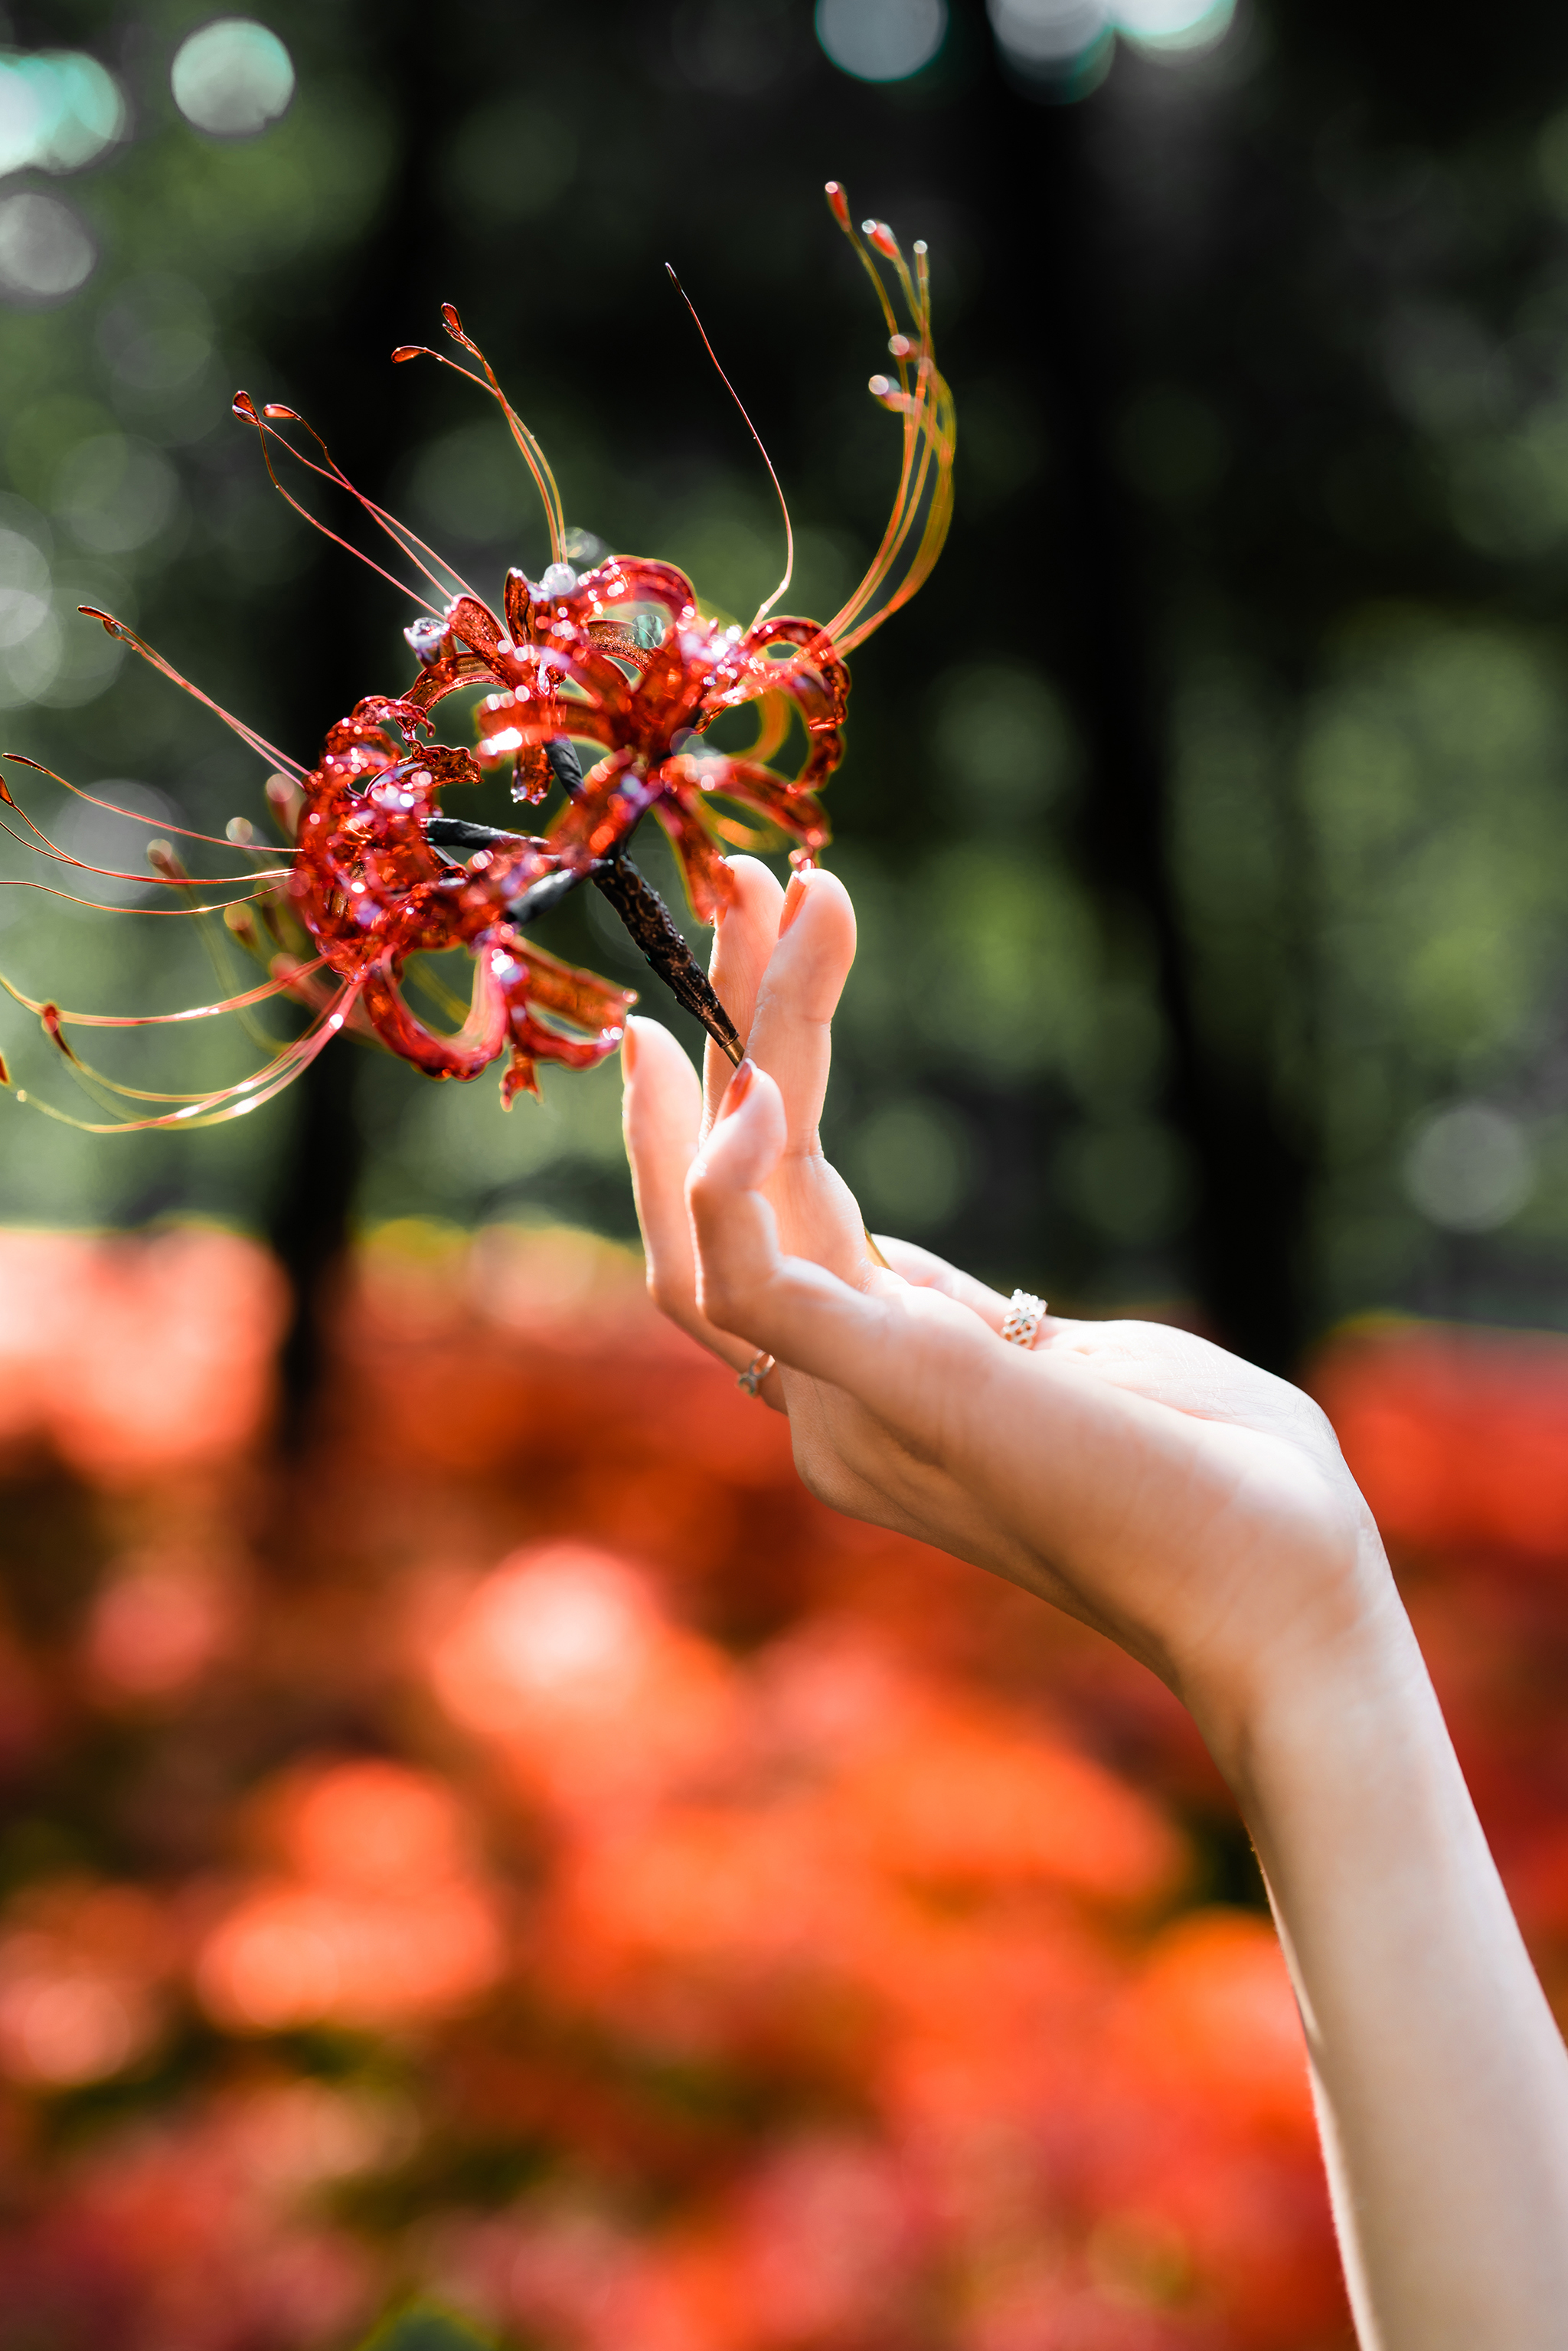 People 2048x3070 Ely Asian Higanbana spider lilies flowers hands rings bokeh forest